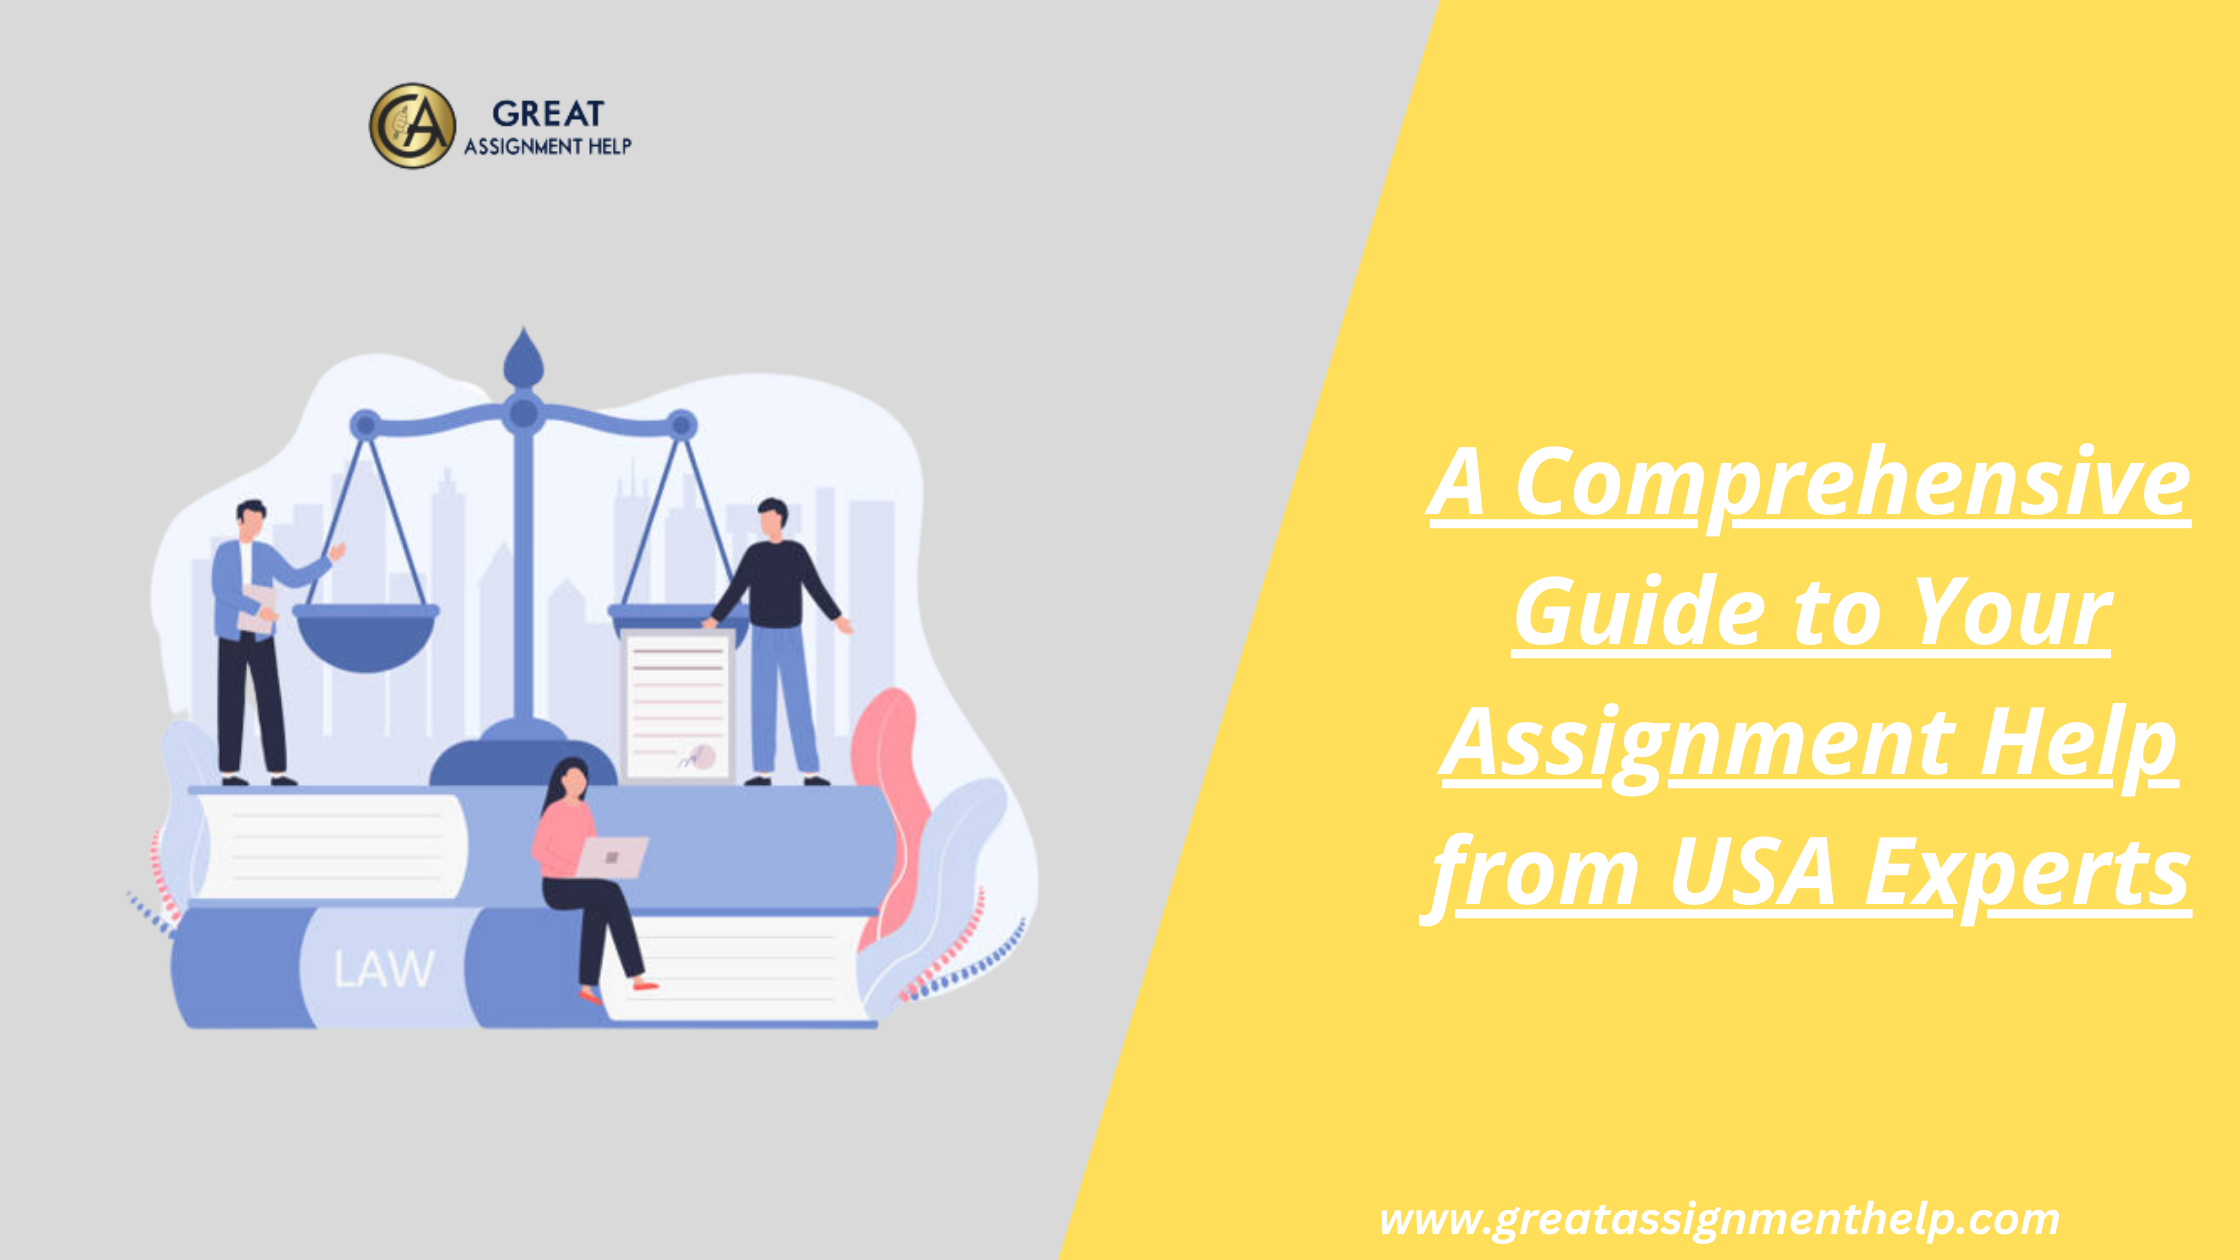 A Comprehensive Guide to Your Assignment Help from USA Experts